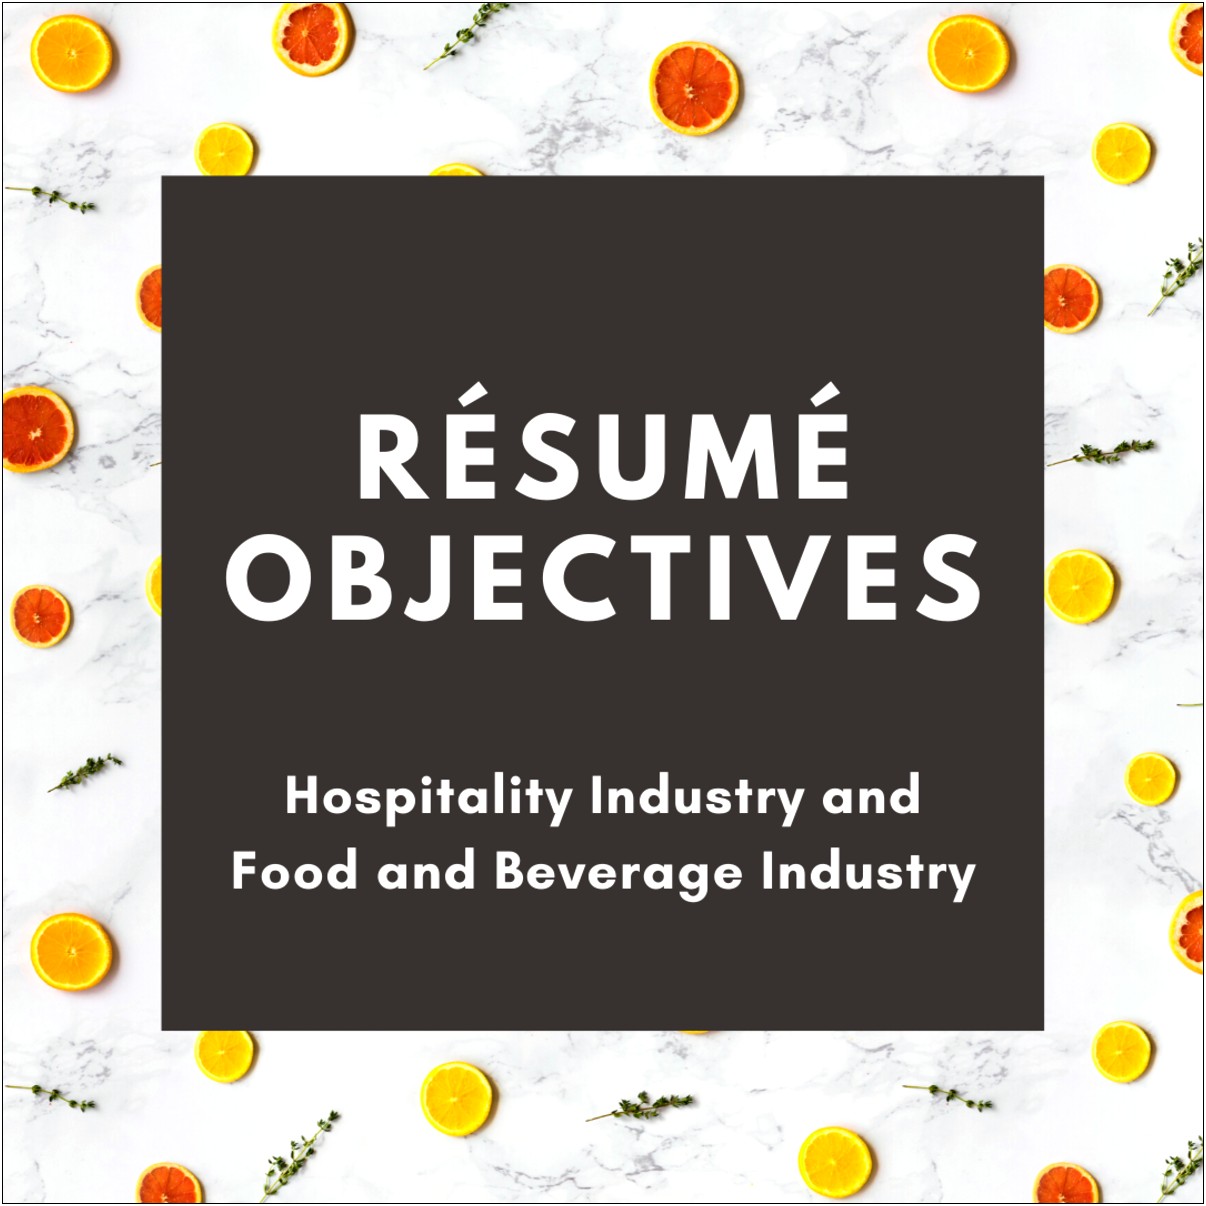 Example Resume Objectives Quote Specialist